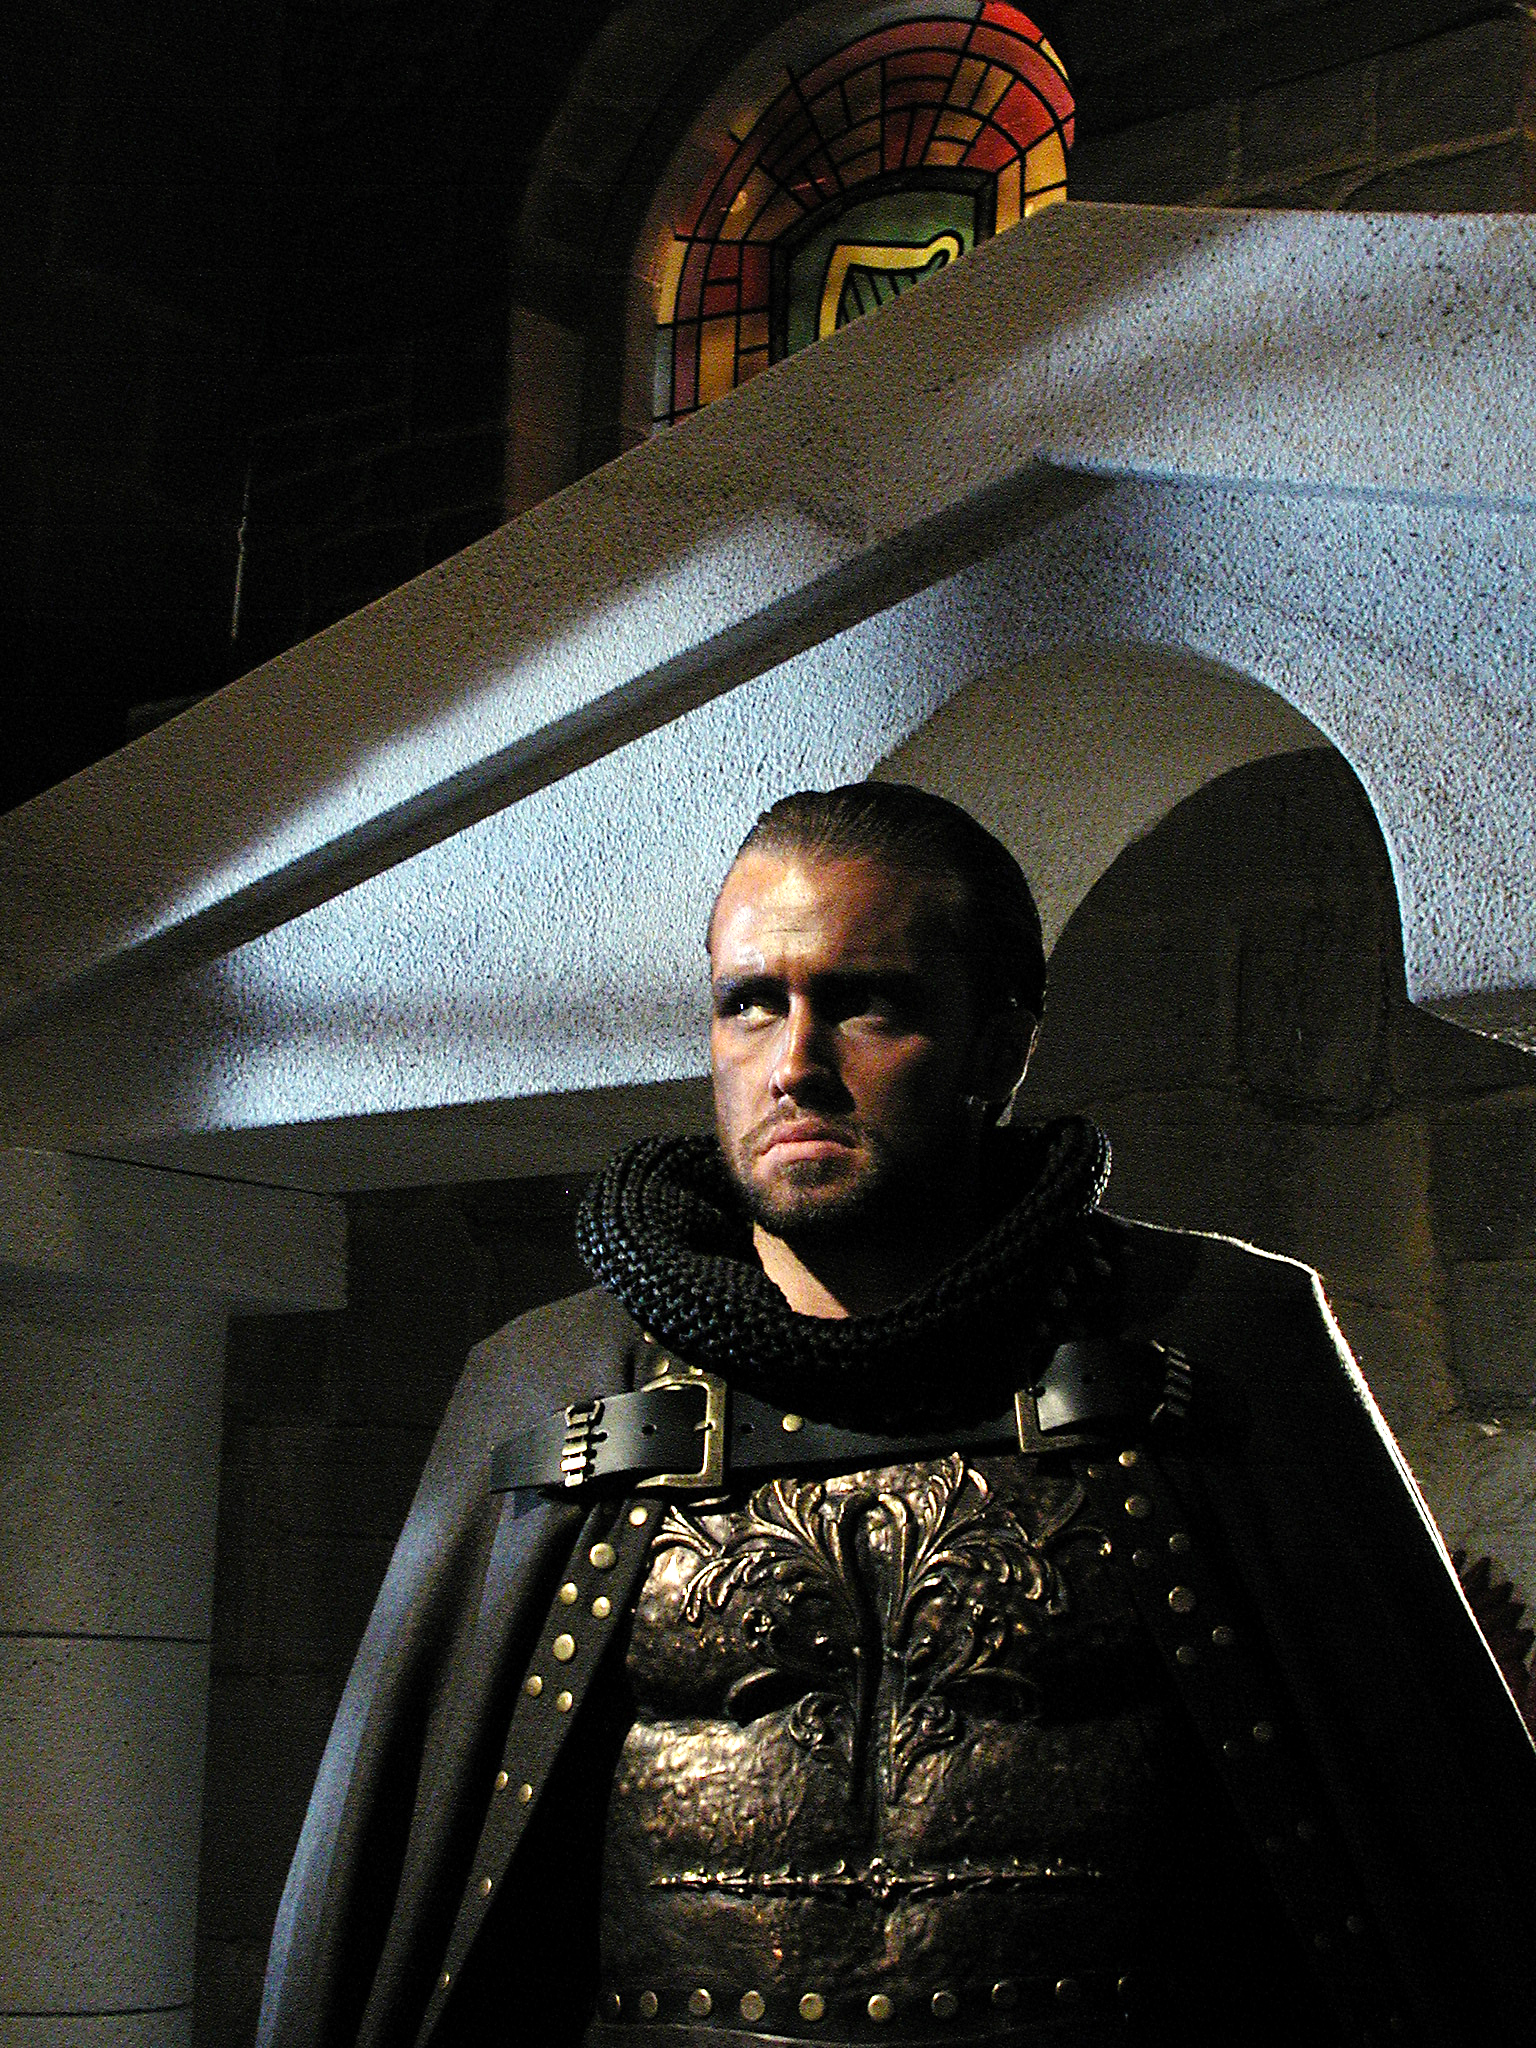 Dwayne Cameron as Mordred in Dark Knight (2001)